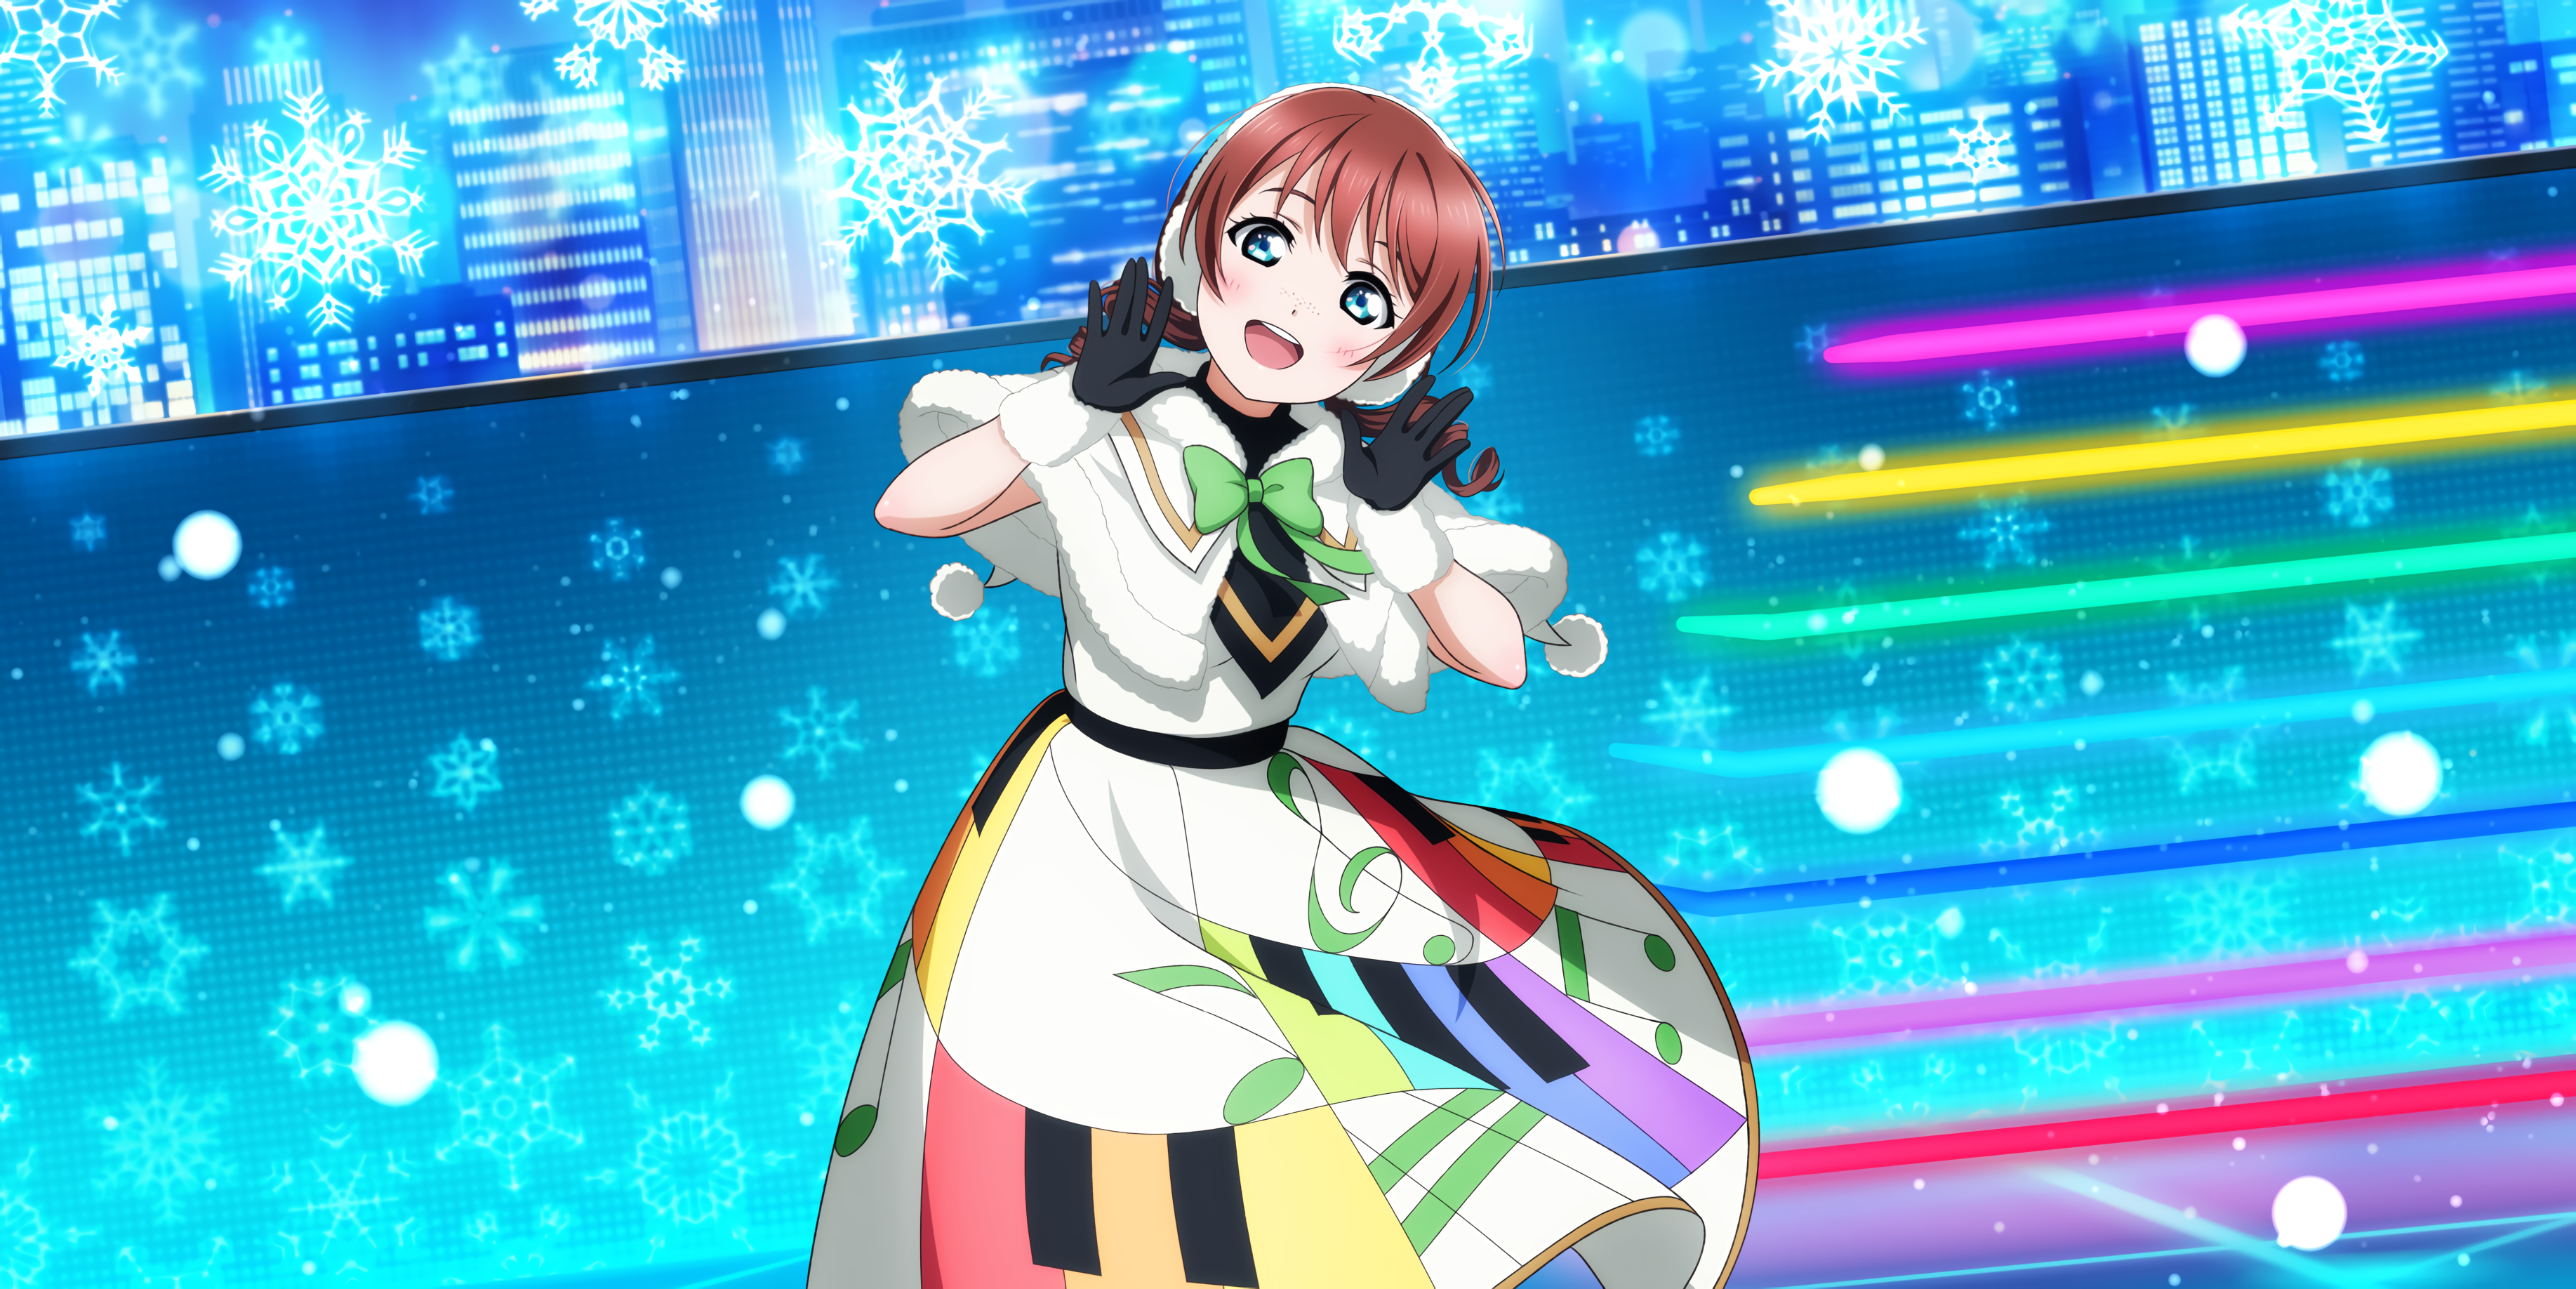 Emma Verde Love Live Blue Eyes Redhead Skirt Green Bow Musical Notes Snowflakes Blushing Looking At  3670x1836